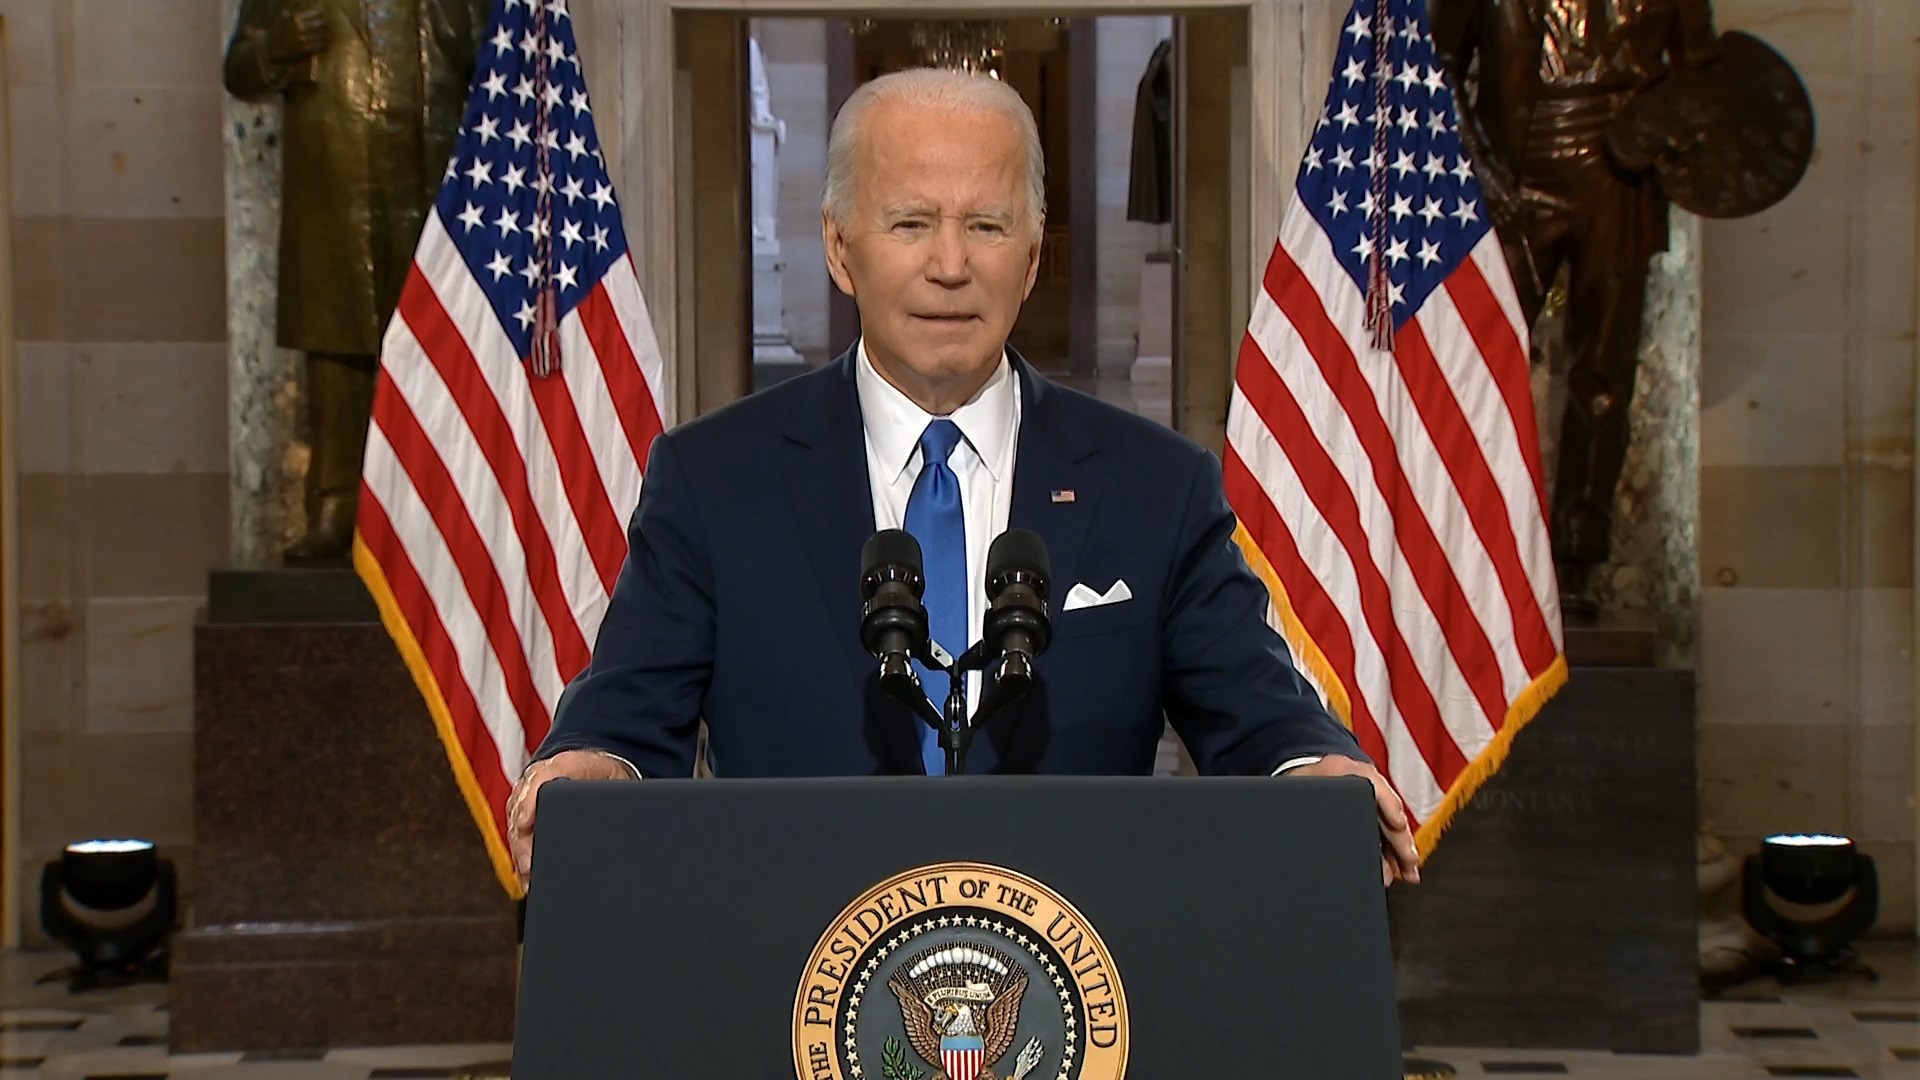 On Jan. anniversary, Biden calls out Trump for 'web of lies' about 2020  election The Washington Post